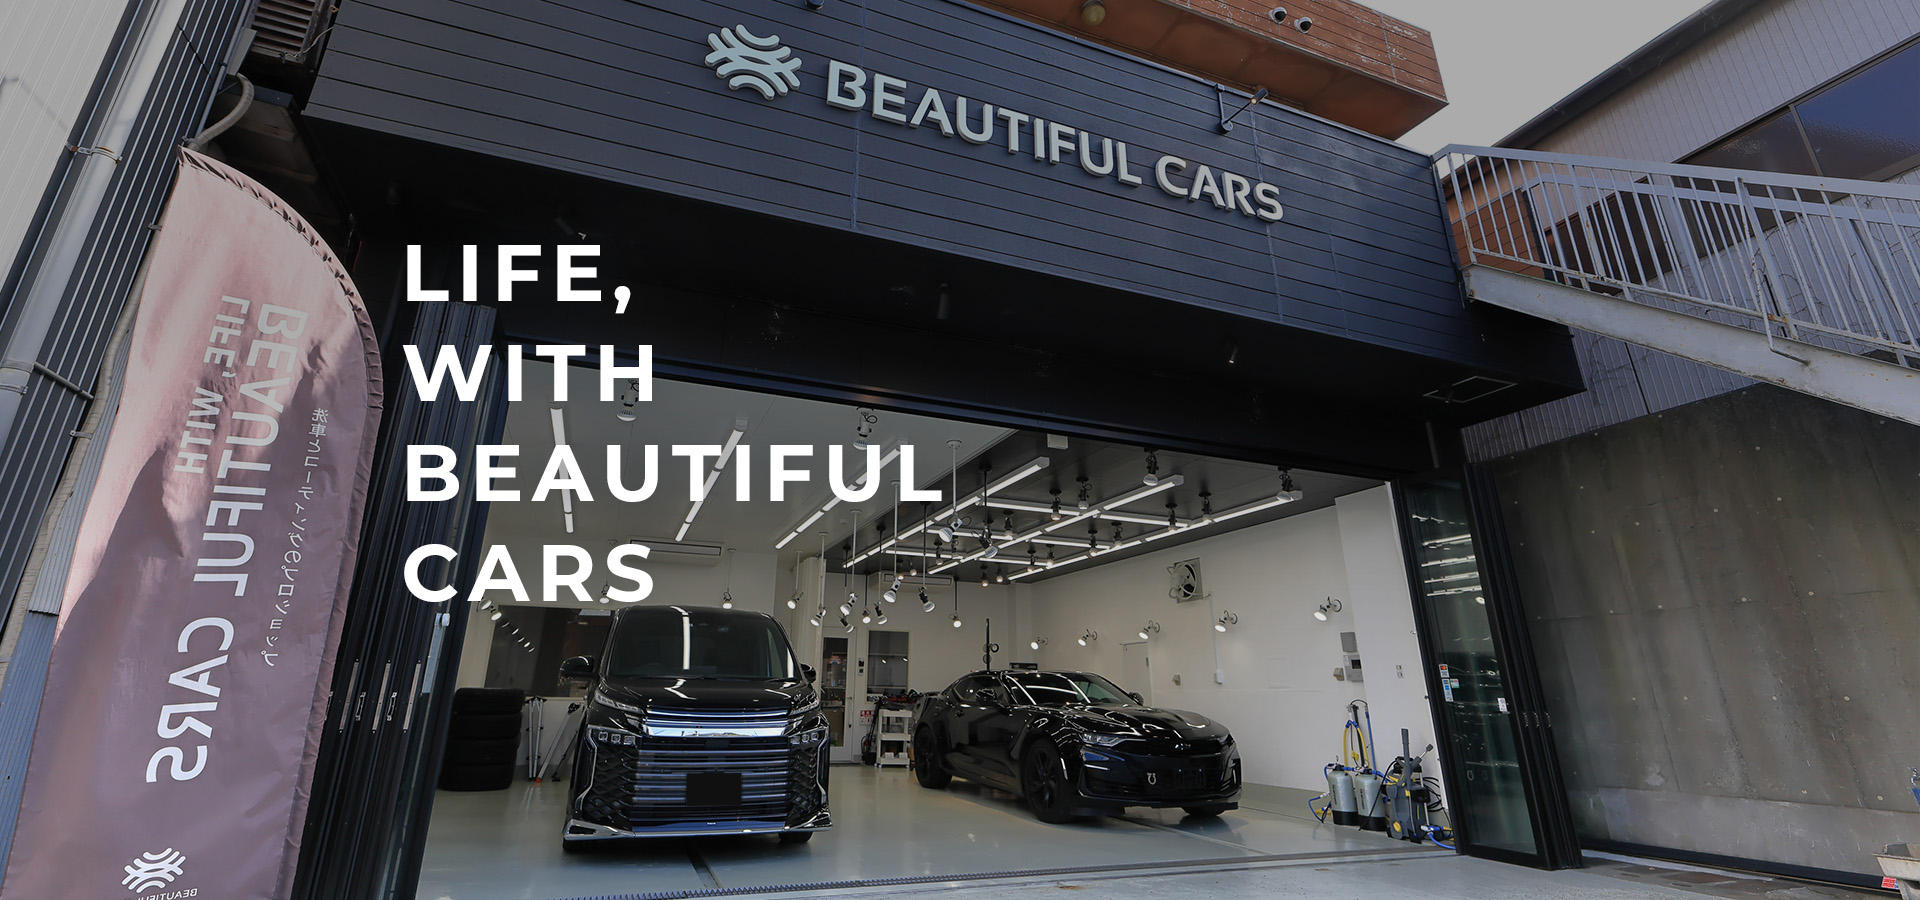 LIFE, WITH BEAUTIFUL CARS